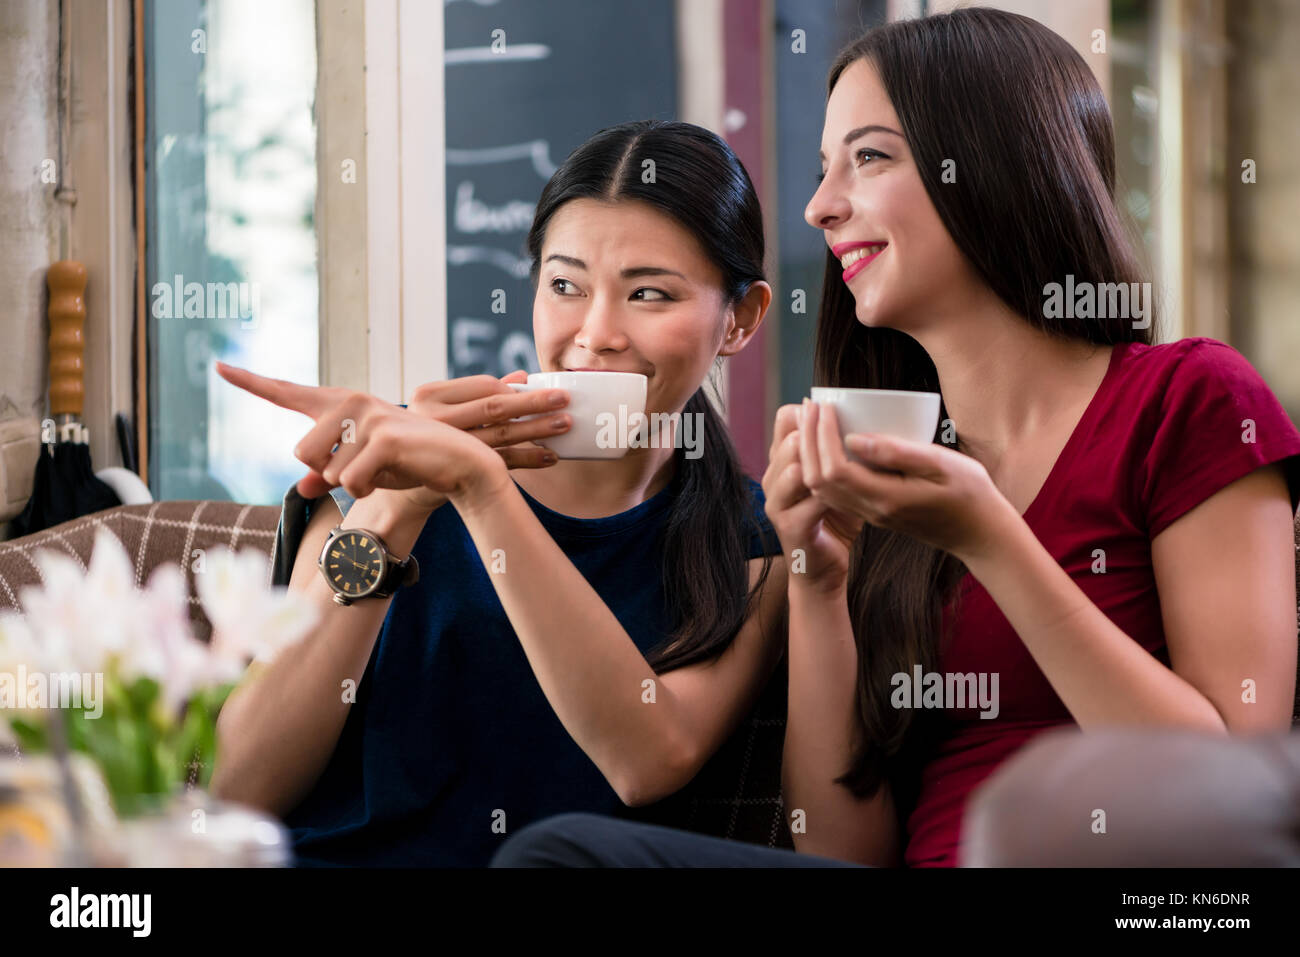 Chatty young woman pointing while sitting in a coffee shop Stock Photo